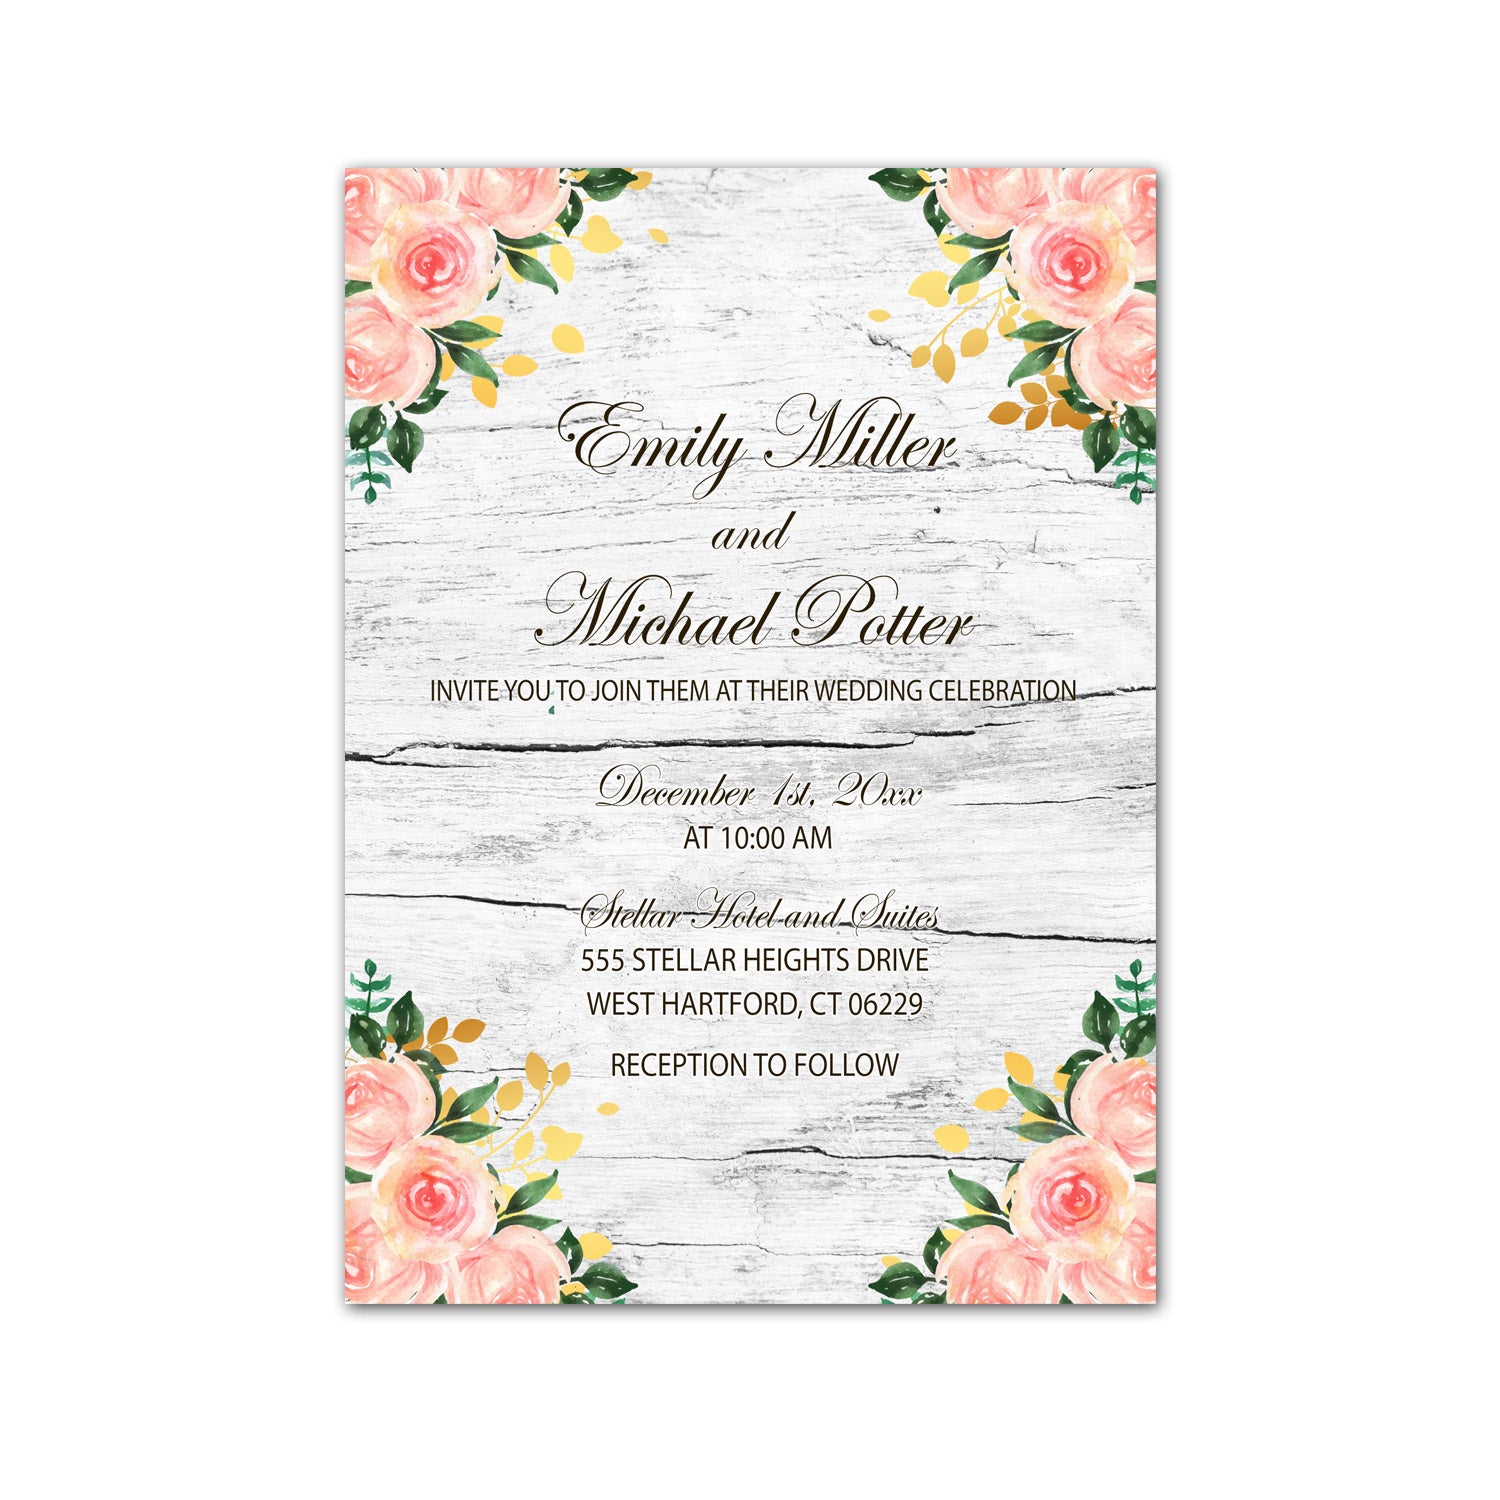 Gold Pink Rustic Wedding Invitations & RSVP Cards